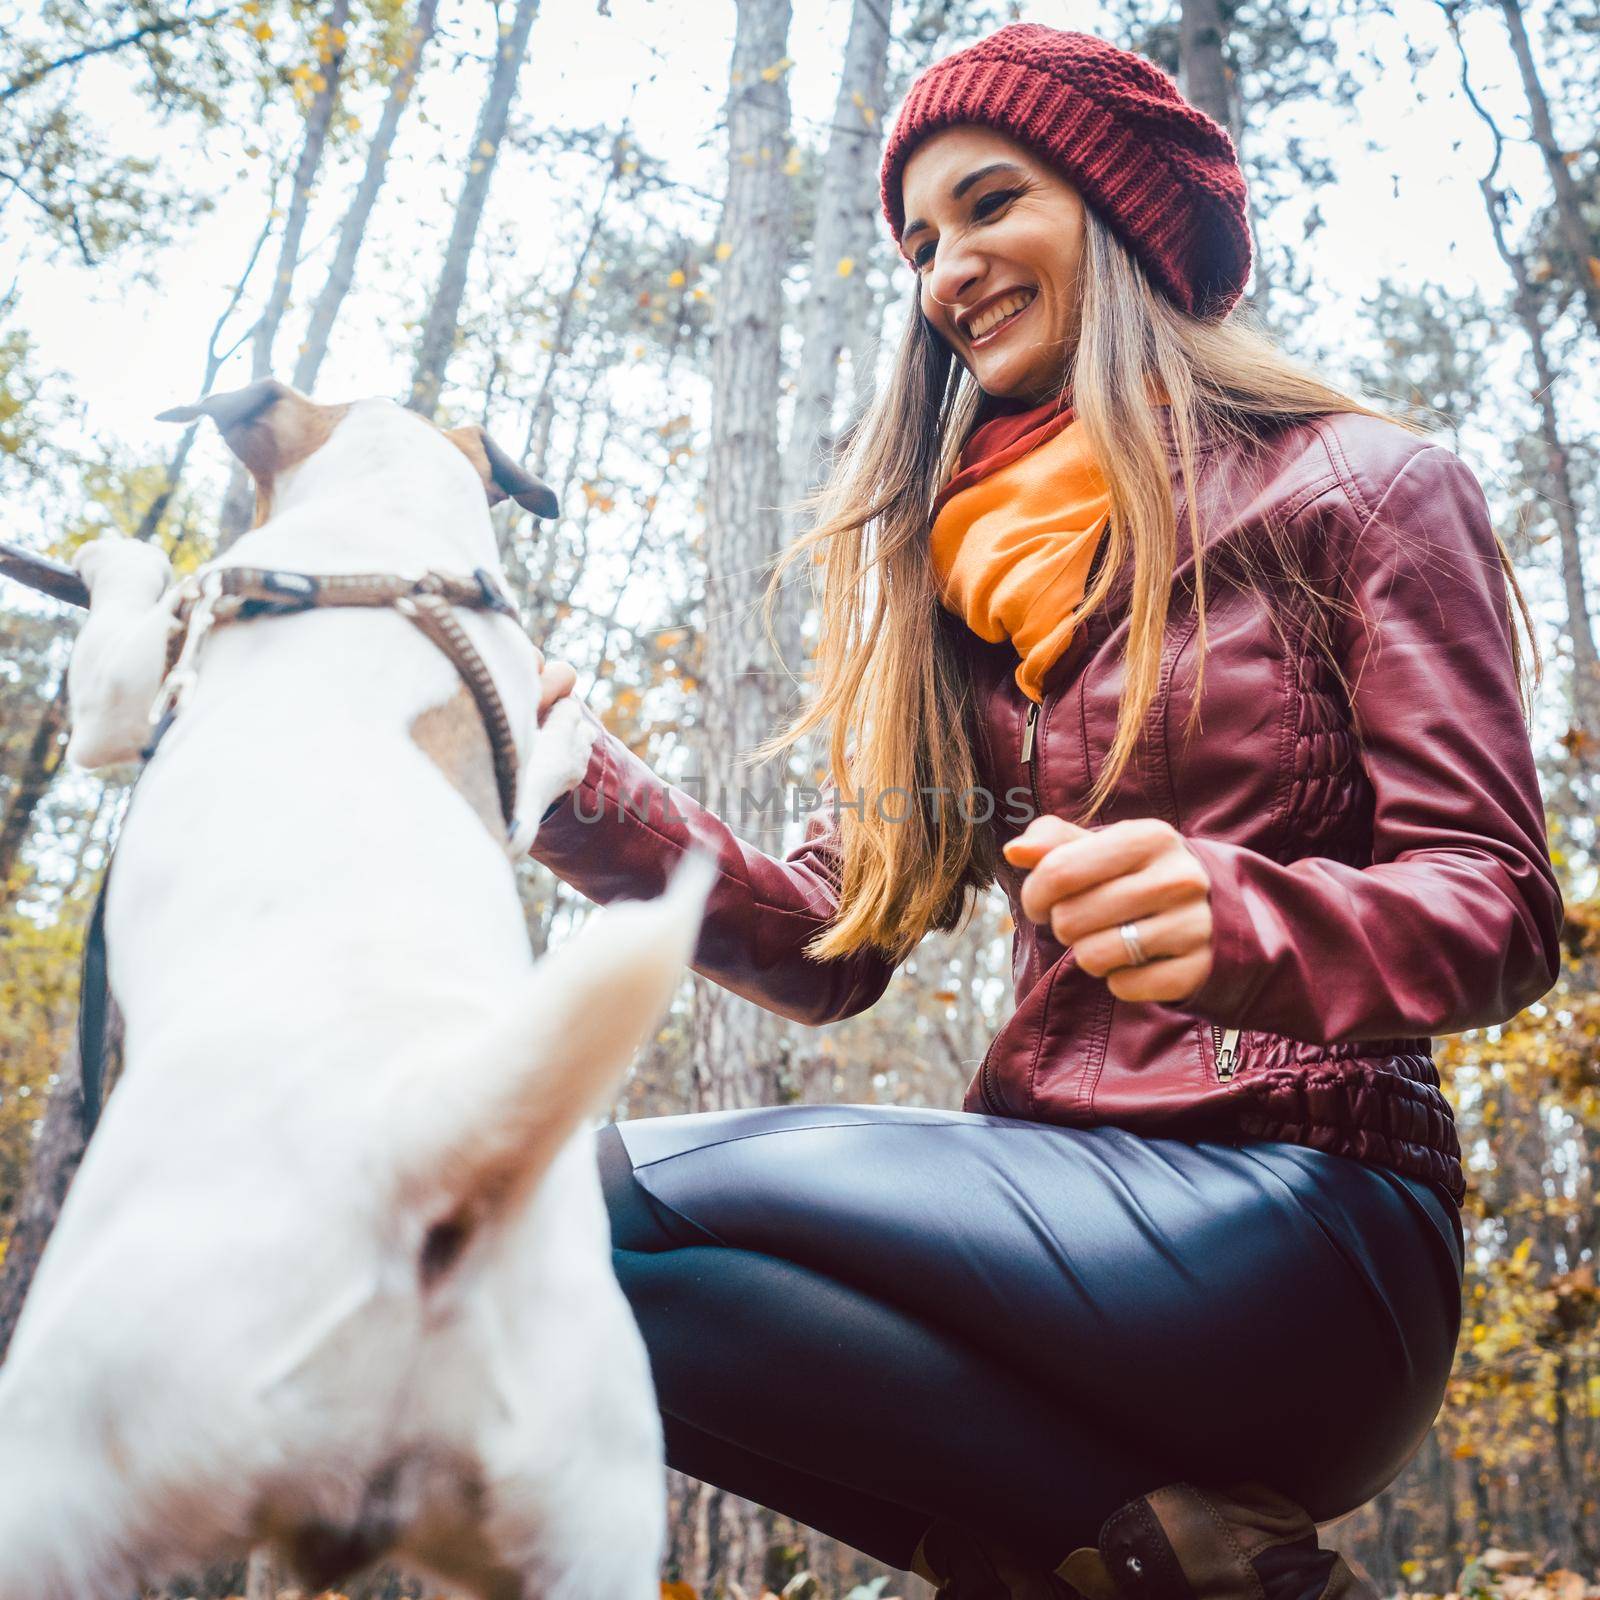 Woman and her dog in playful mood having fun in fall forest